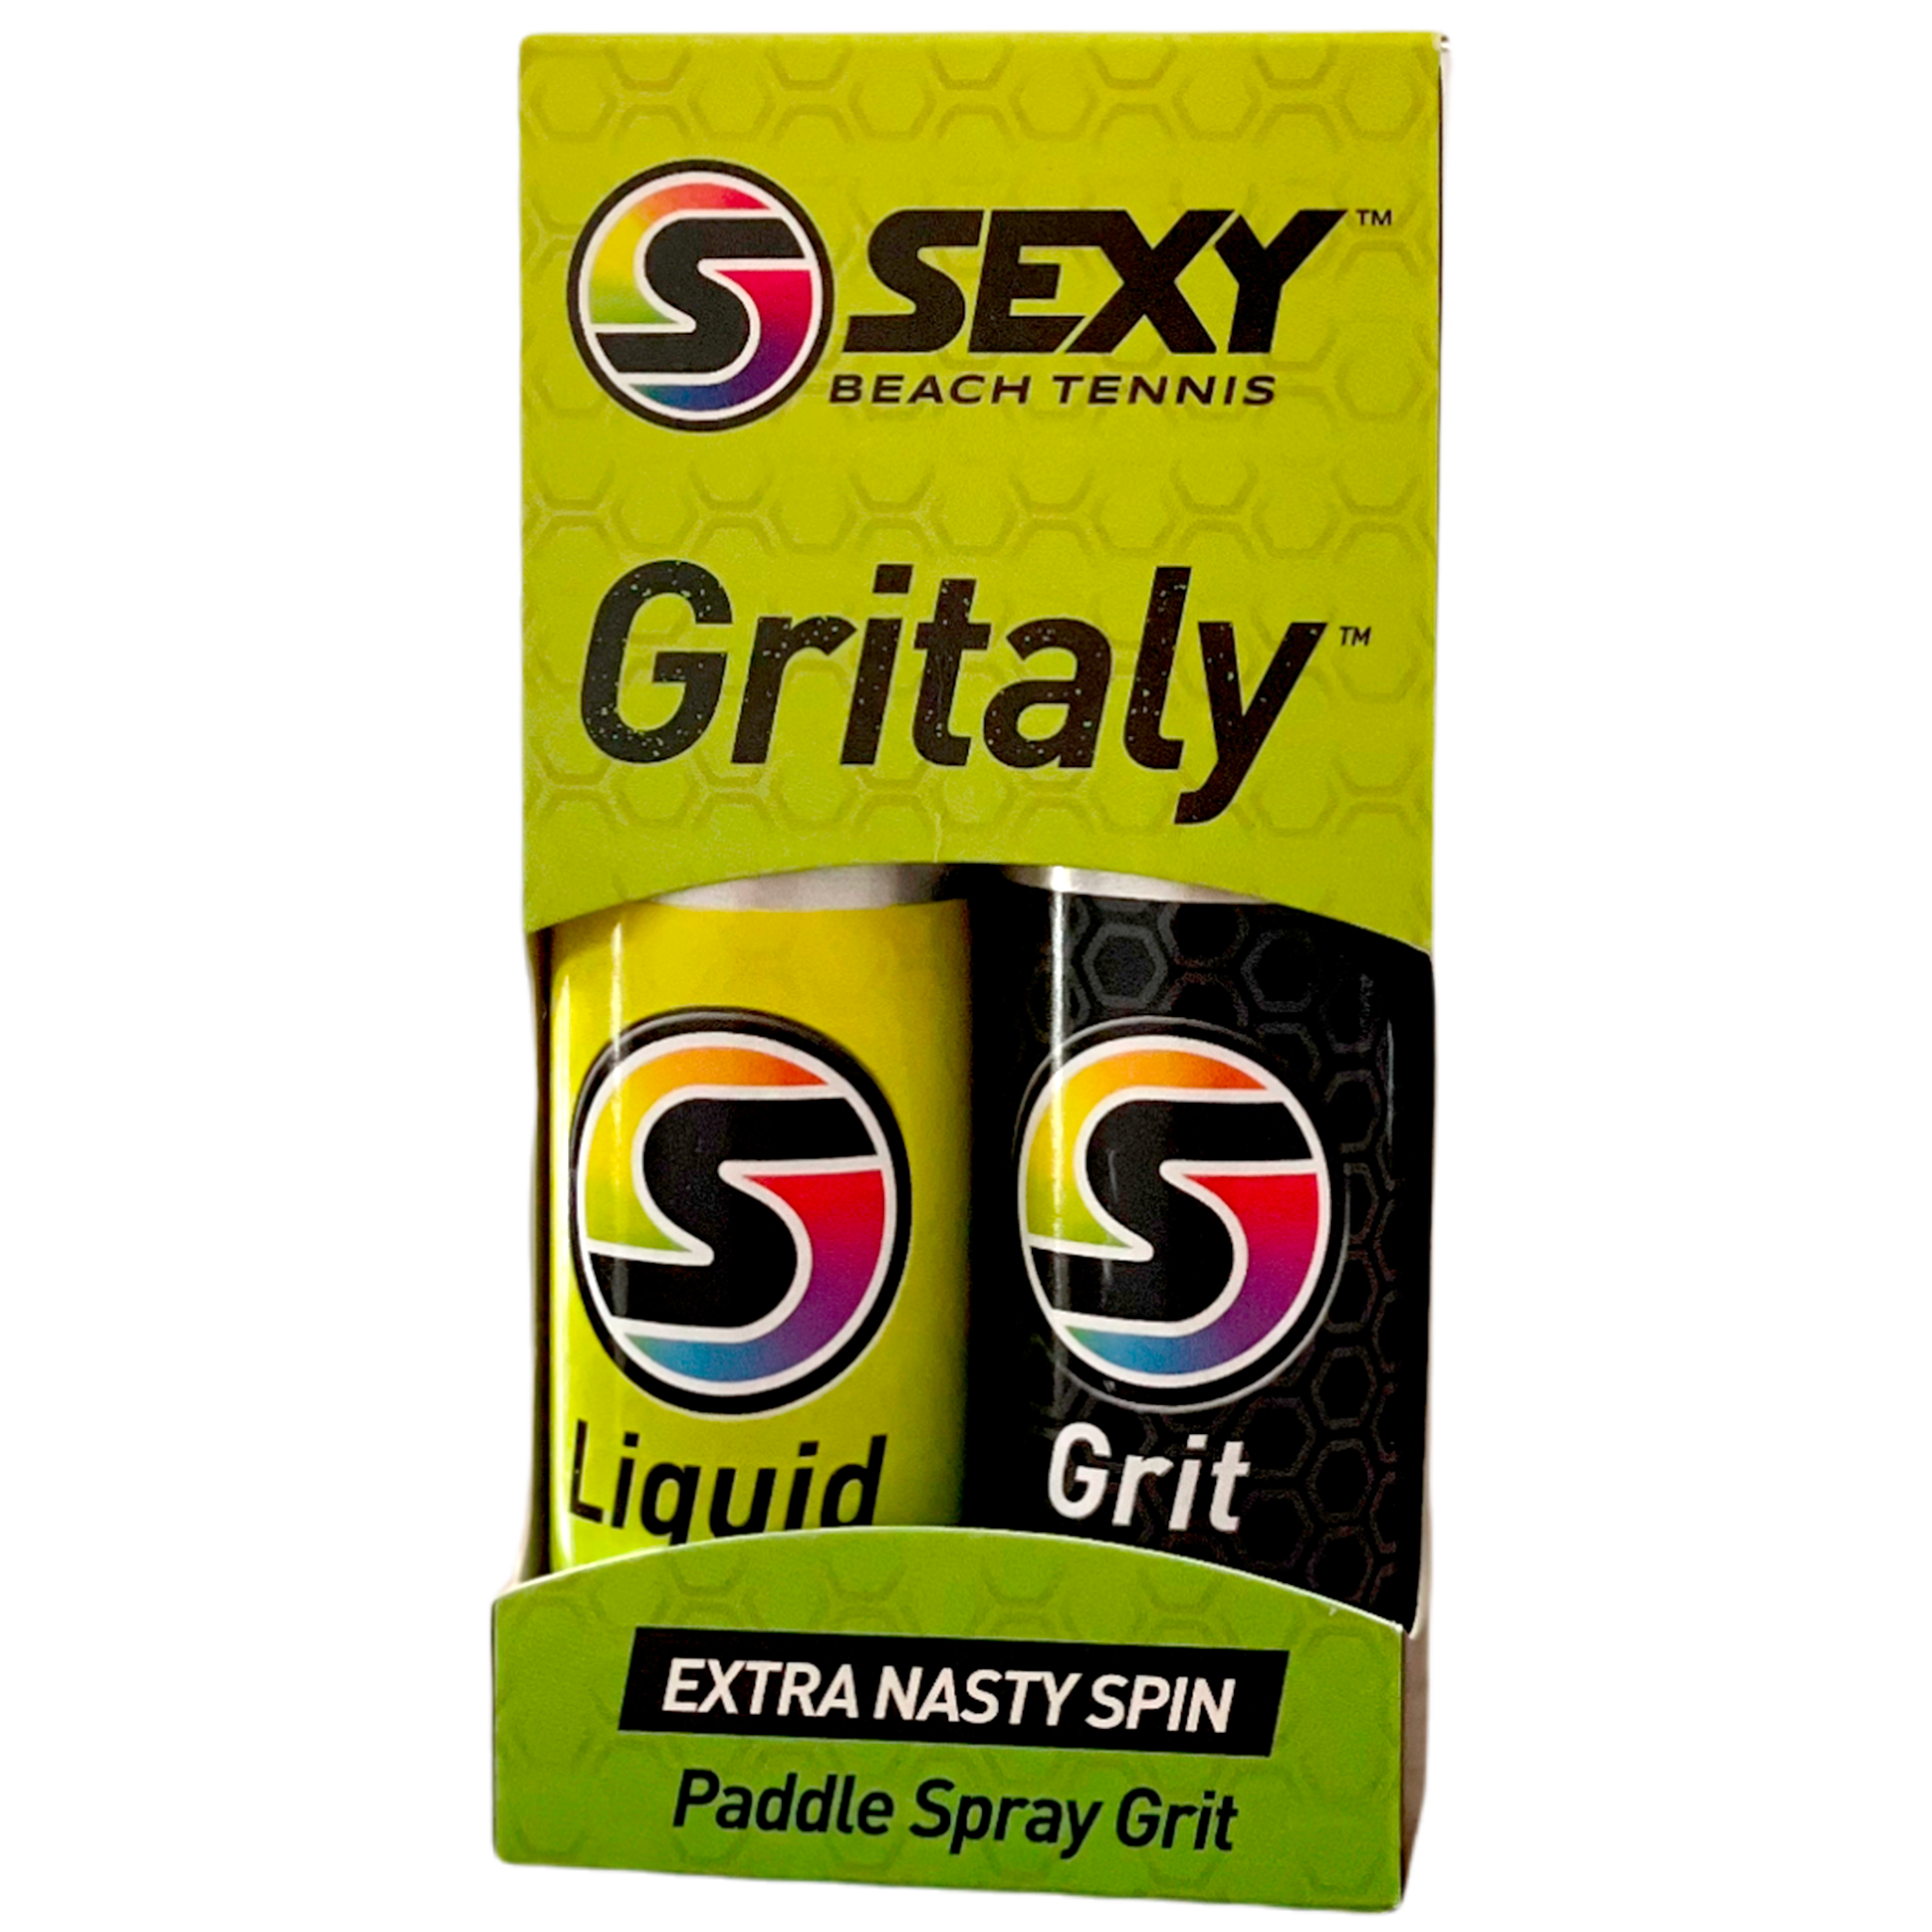 SEXY BRAND Gritaly Spin Kit